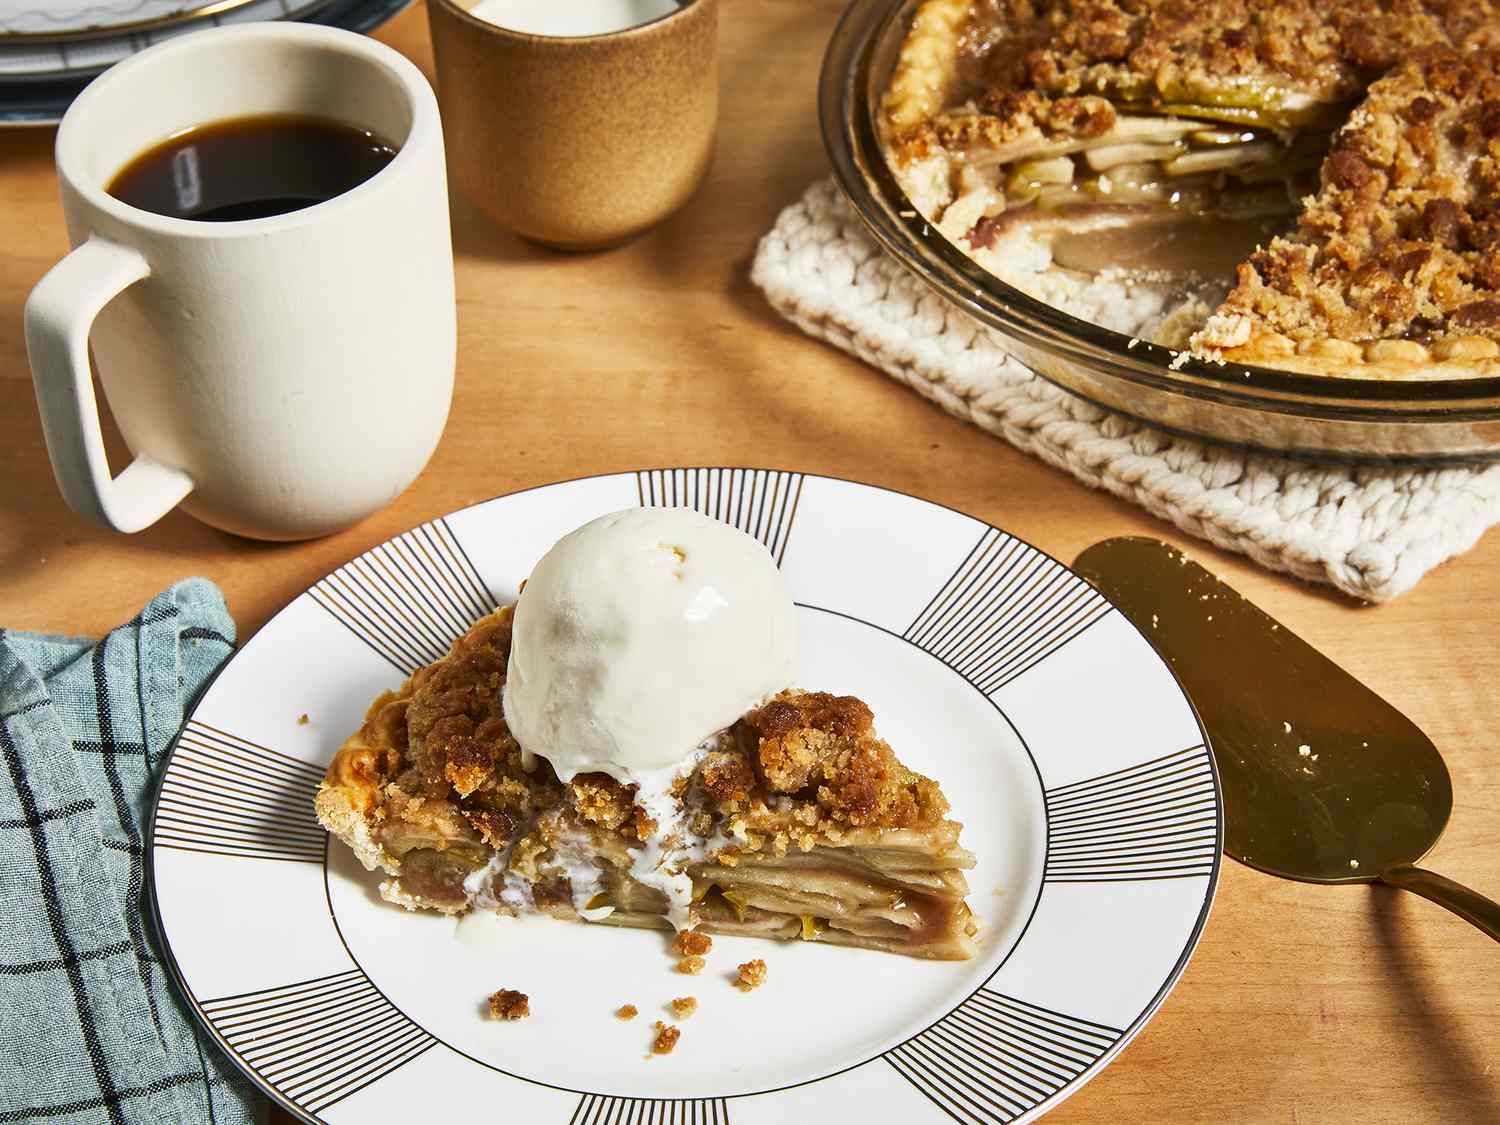 Close up view of a slice of Apple Crumb Pie with ice cream on top on a plate, with a cup of coffee and pie in a pie plate in the background